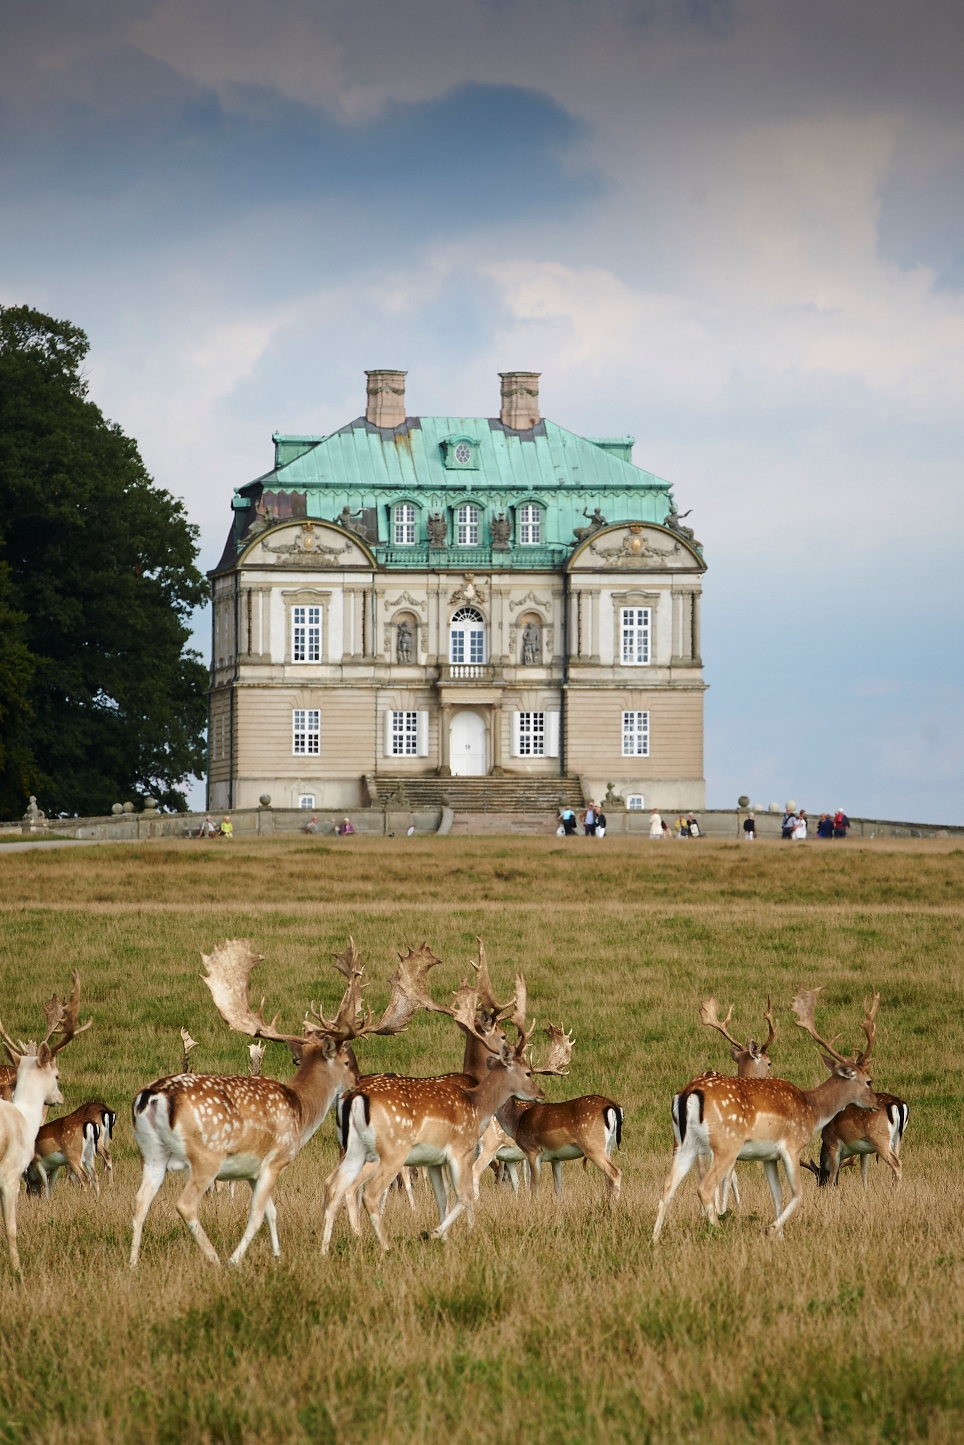 The Dyrehave (deer park) (picture by Peter Lassen at the Naturstyrelsen)